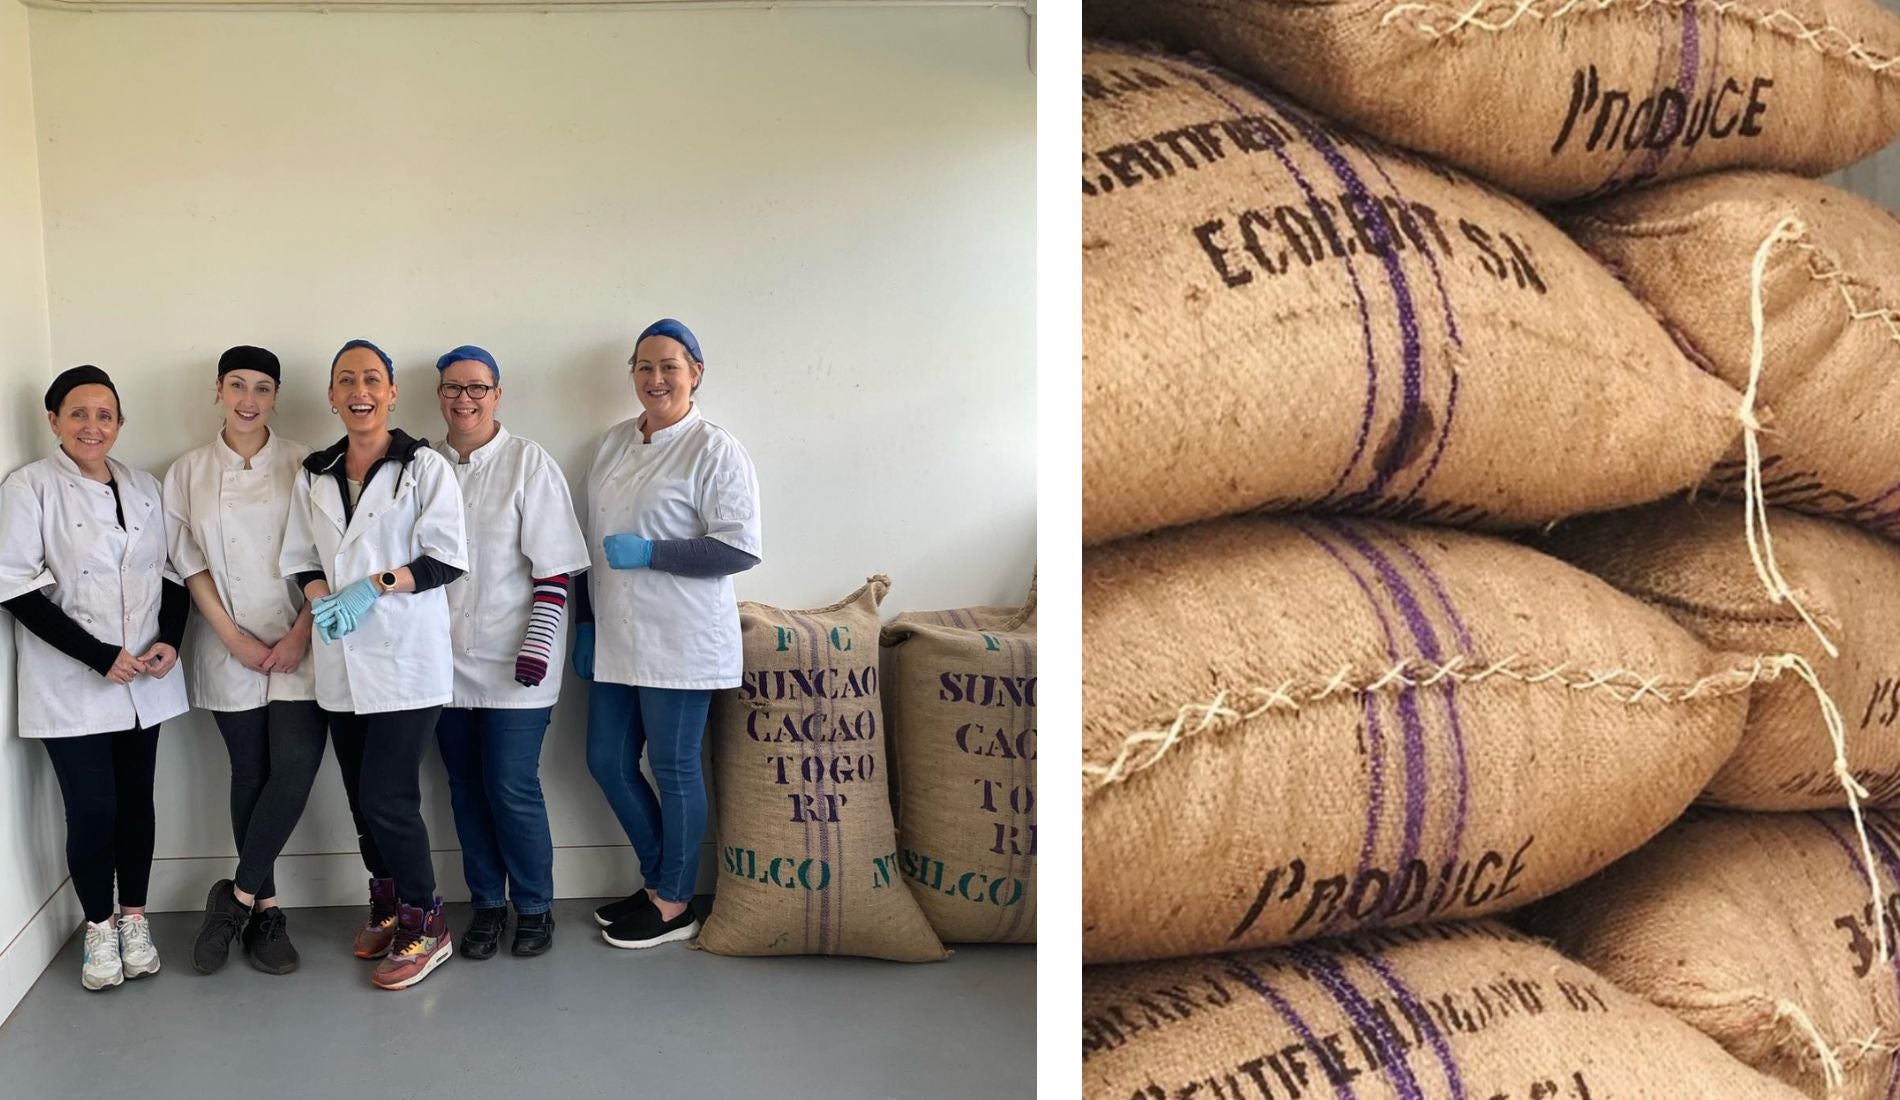 Our Craft Chocolate Making Team in the Factory next to burlap sacks full of cocoa beans